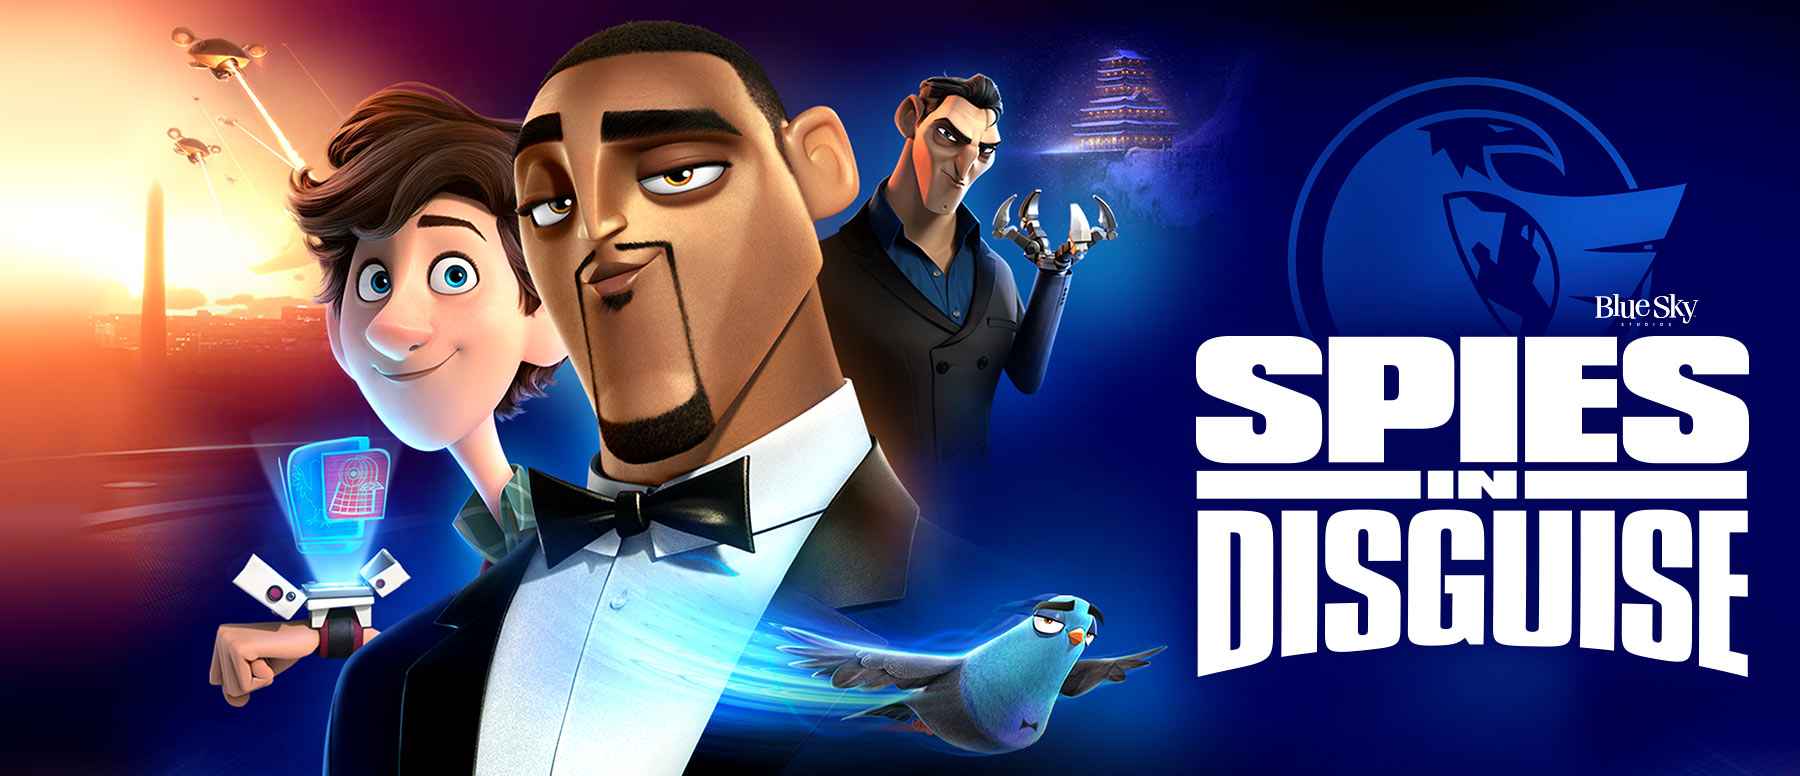 SPIES IN DISGUISE [Blu-Ray Review]: This Movie's For The Birds!